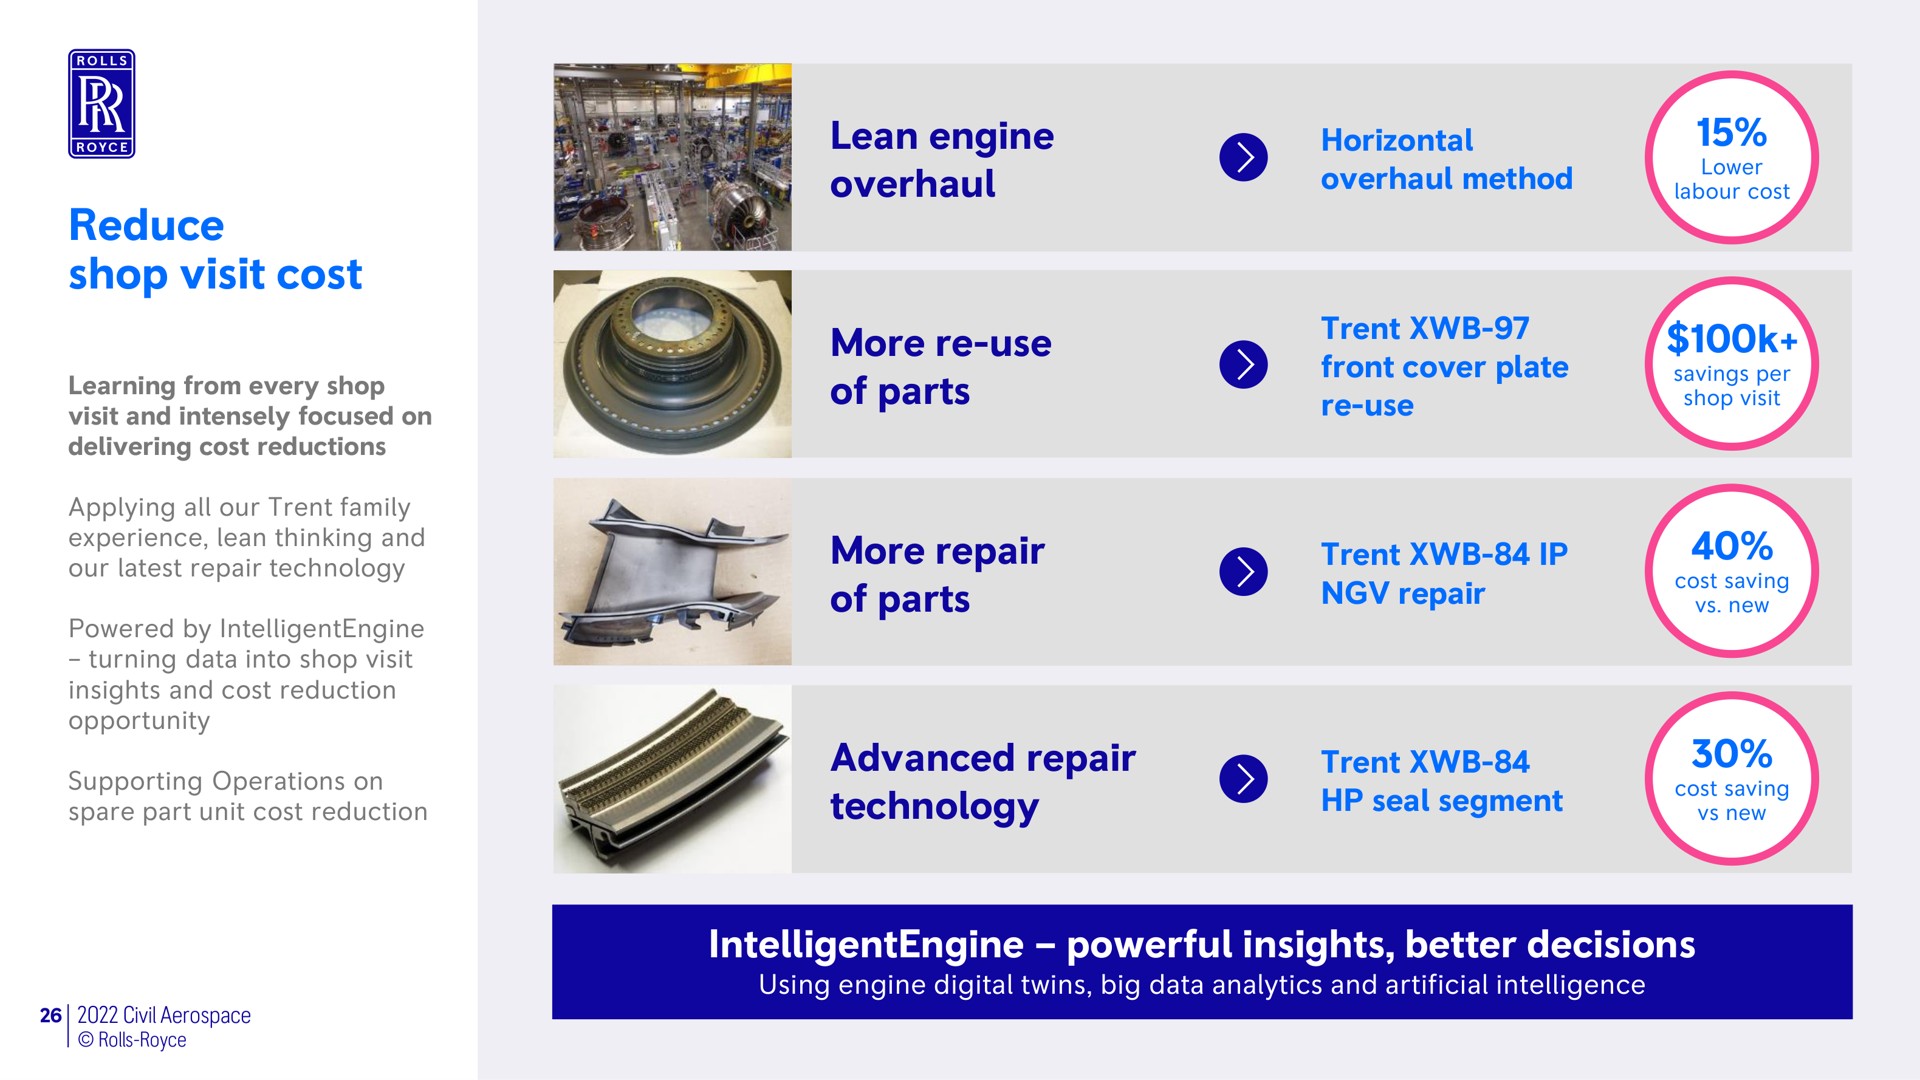 reduce shop visit cost lean engine overhaul more use of parts more repair of parts advanced repair technology powerful insights better decisions lee new | Rolls-Royce Holdings